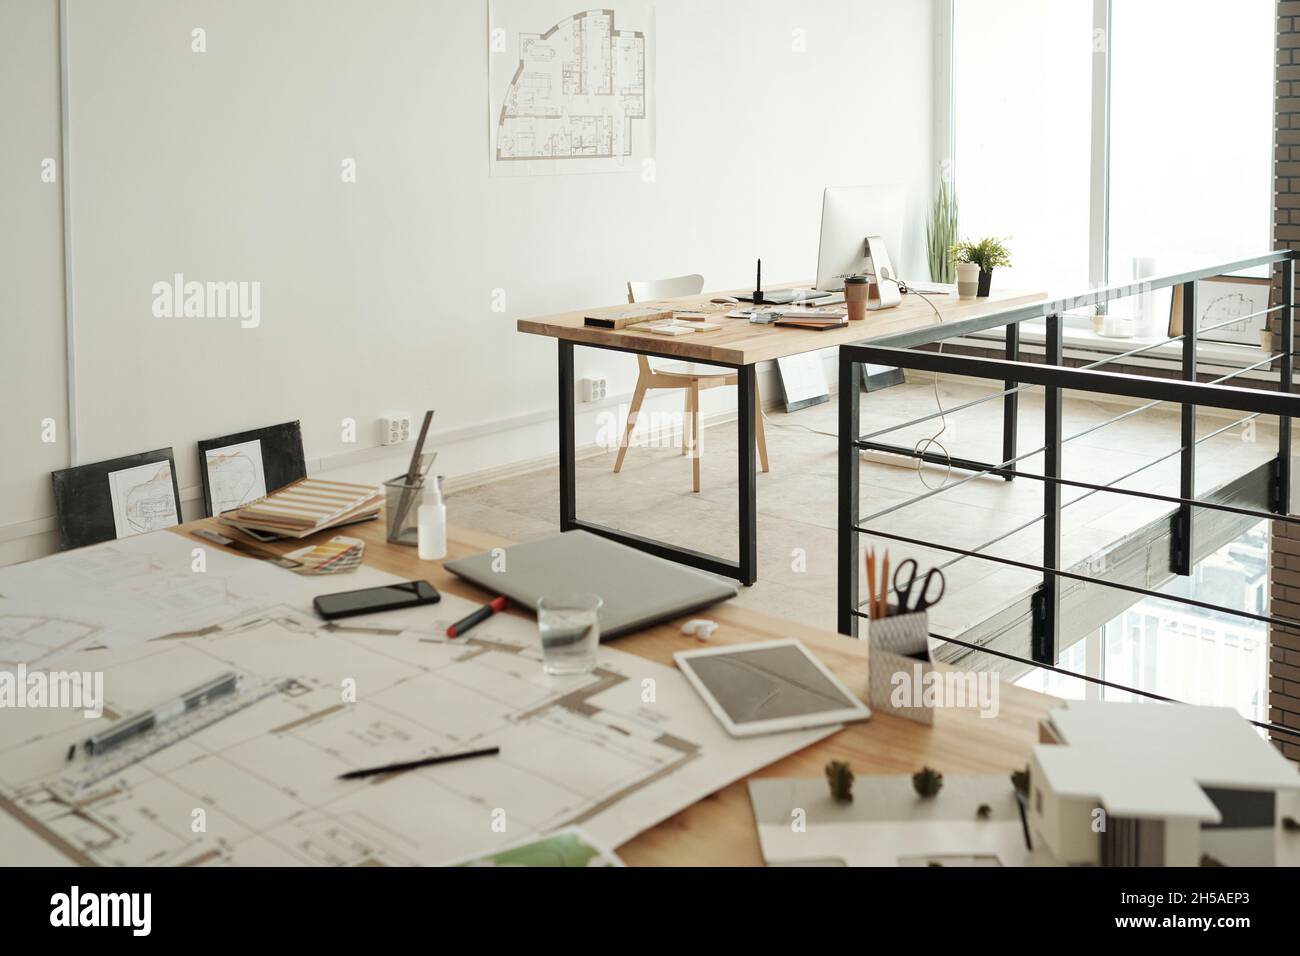 https://c8.alamy.com/comp/2H5AEP3/two-workplaces-consisting-on-tables-with-sketches-blueprints-gadgets-samples-and-other-supplies-in-large-contemporary-openspace-office-2H5AEP3.jpg